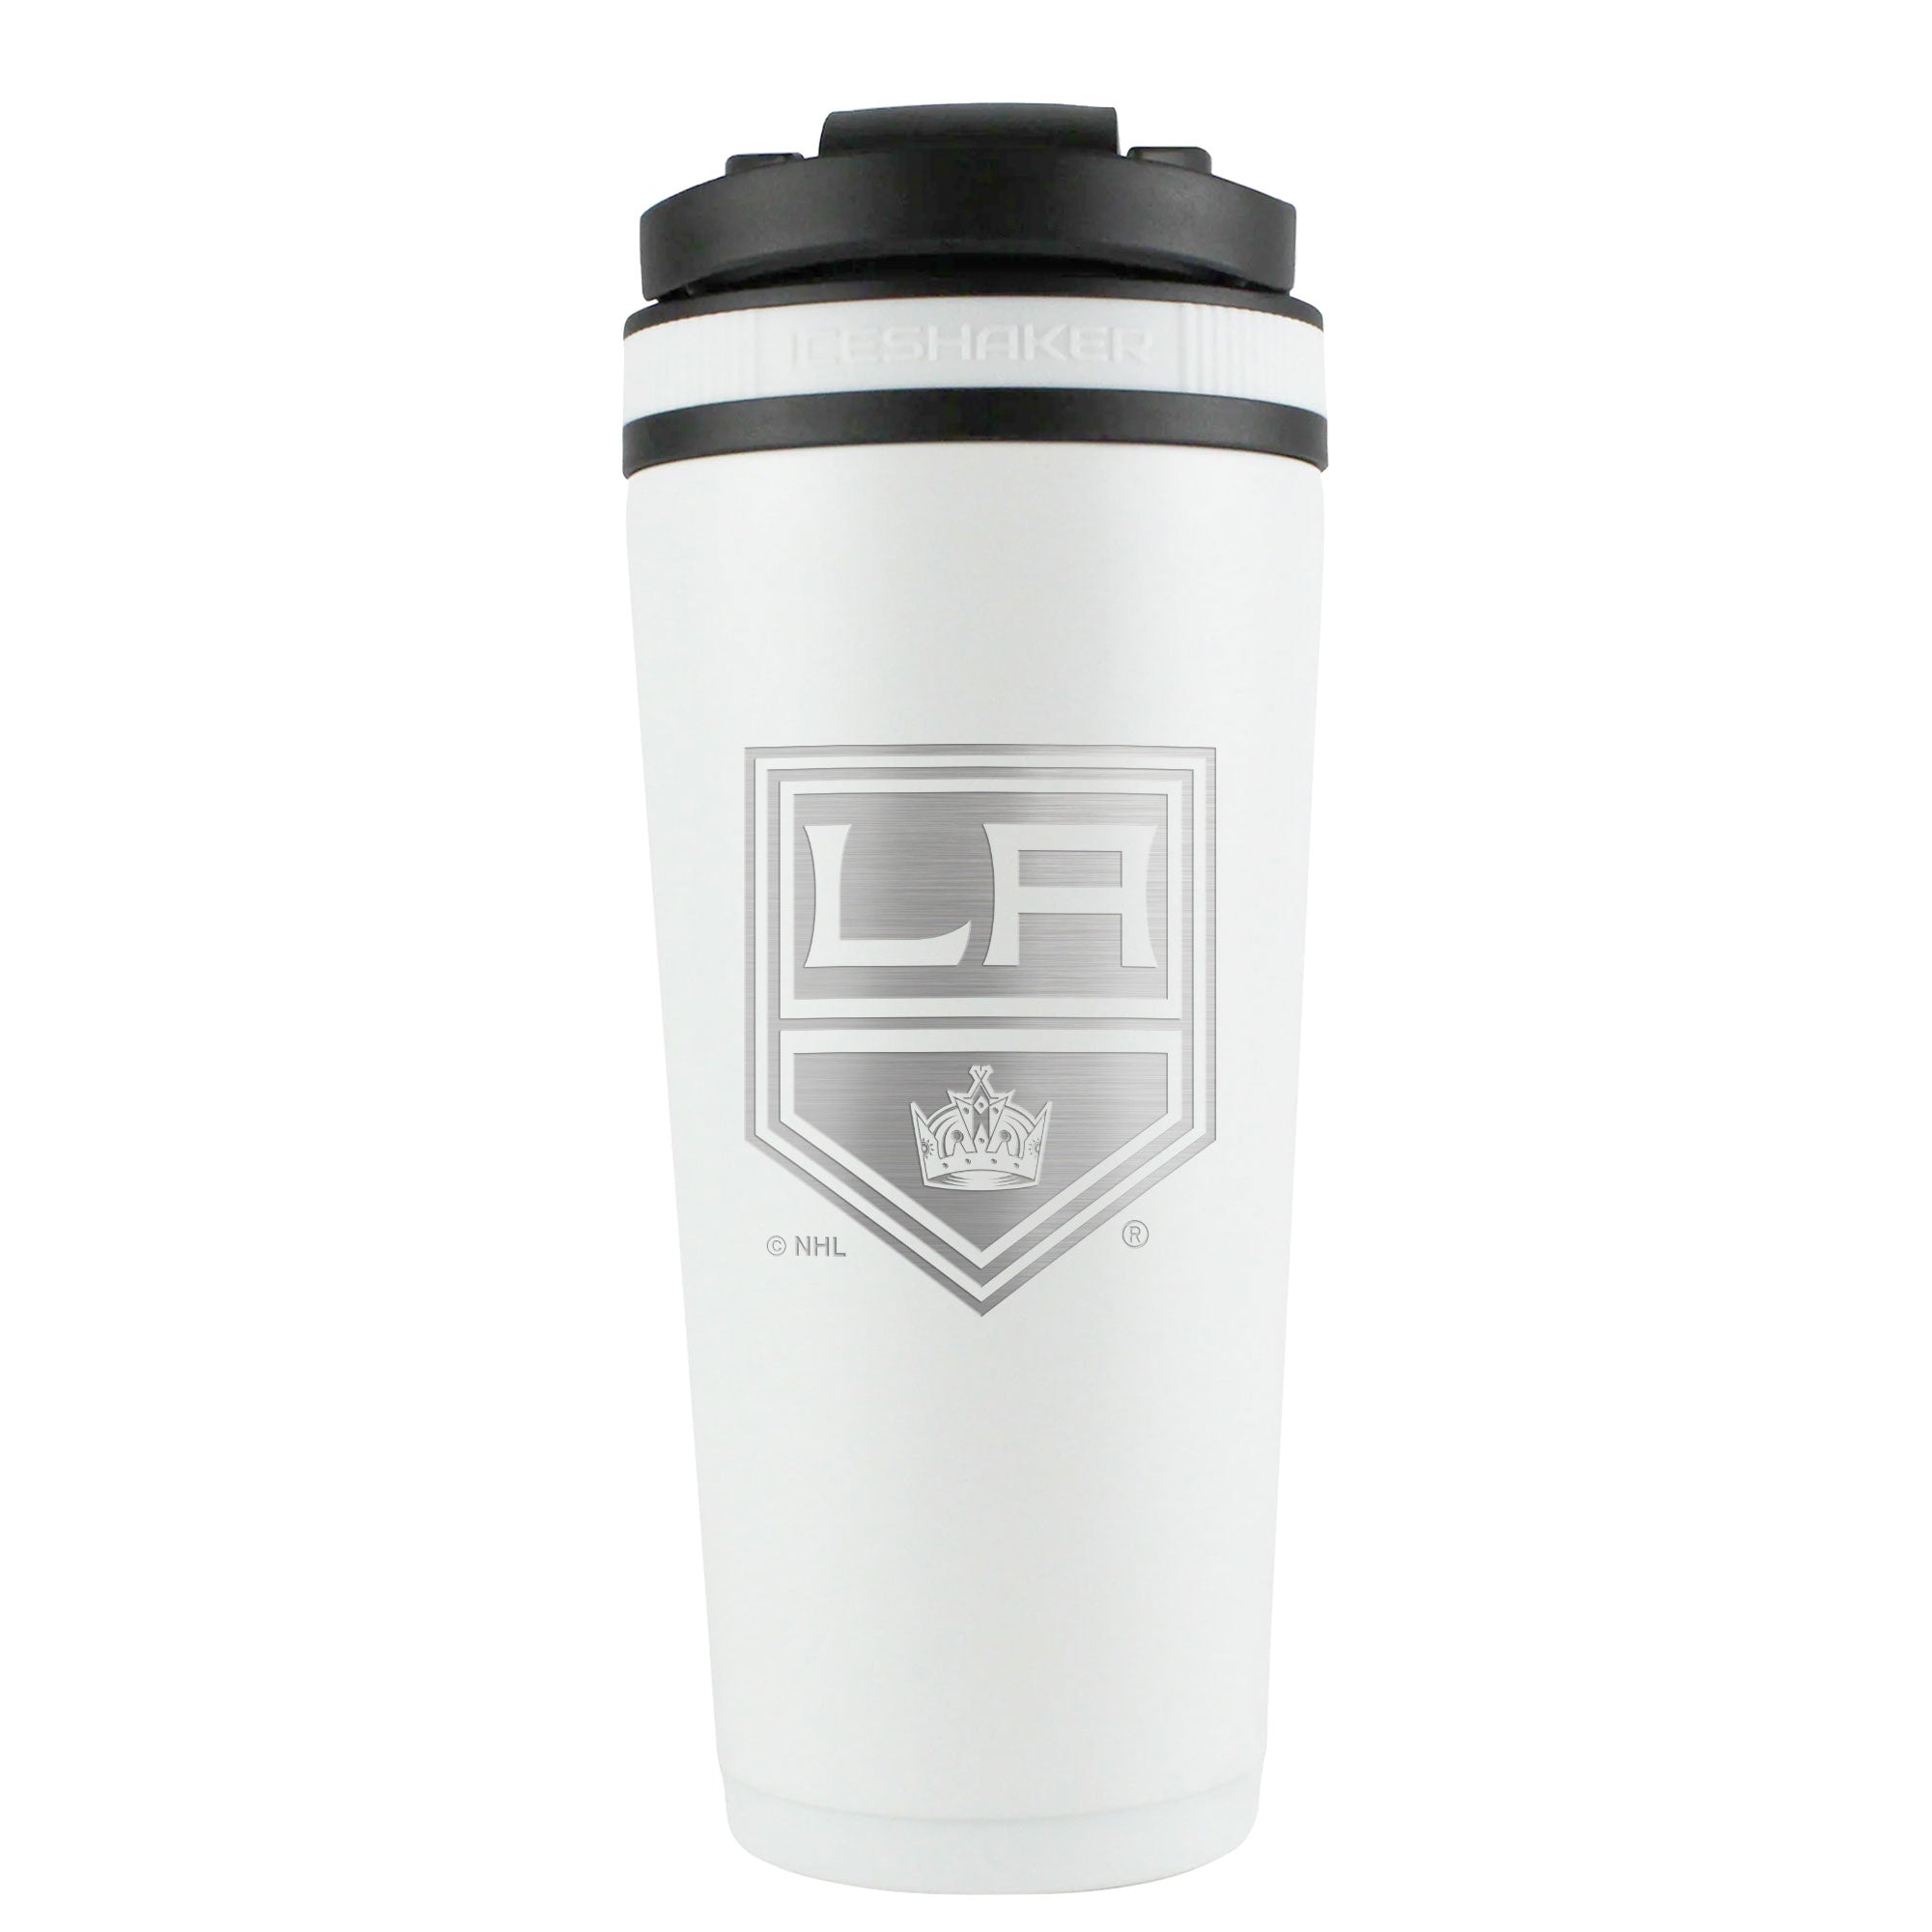 Officially Licensed Los Angeles Kings 26oz Ice Shaker - White